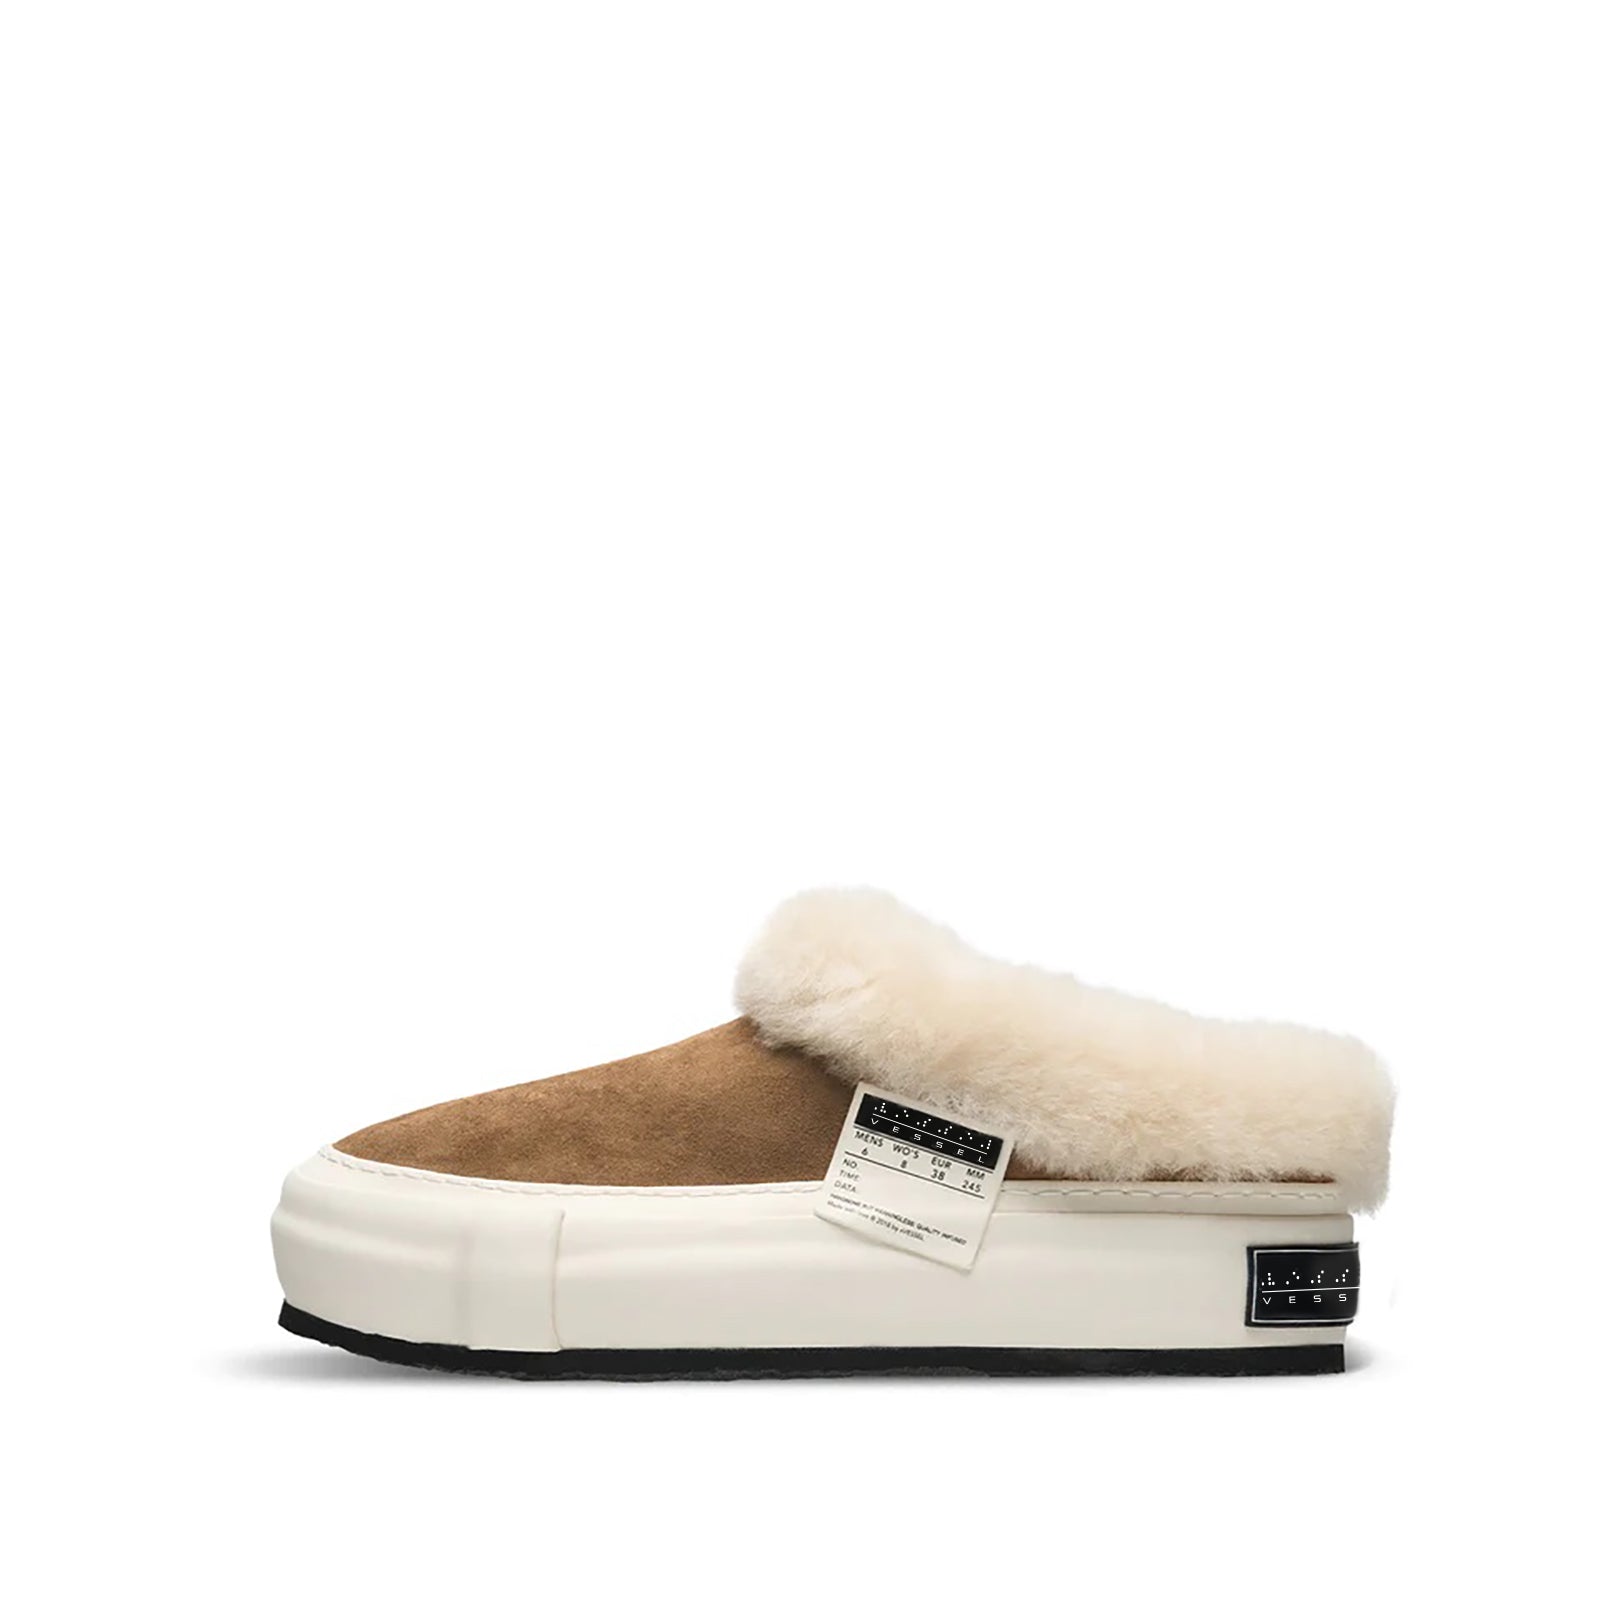 xVESSEL Slip On Warmers - Ranch Suede